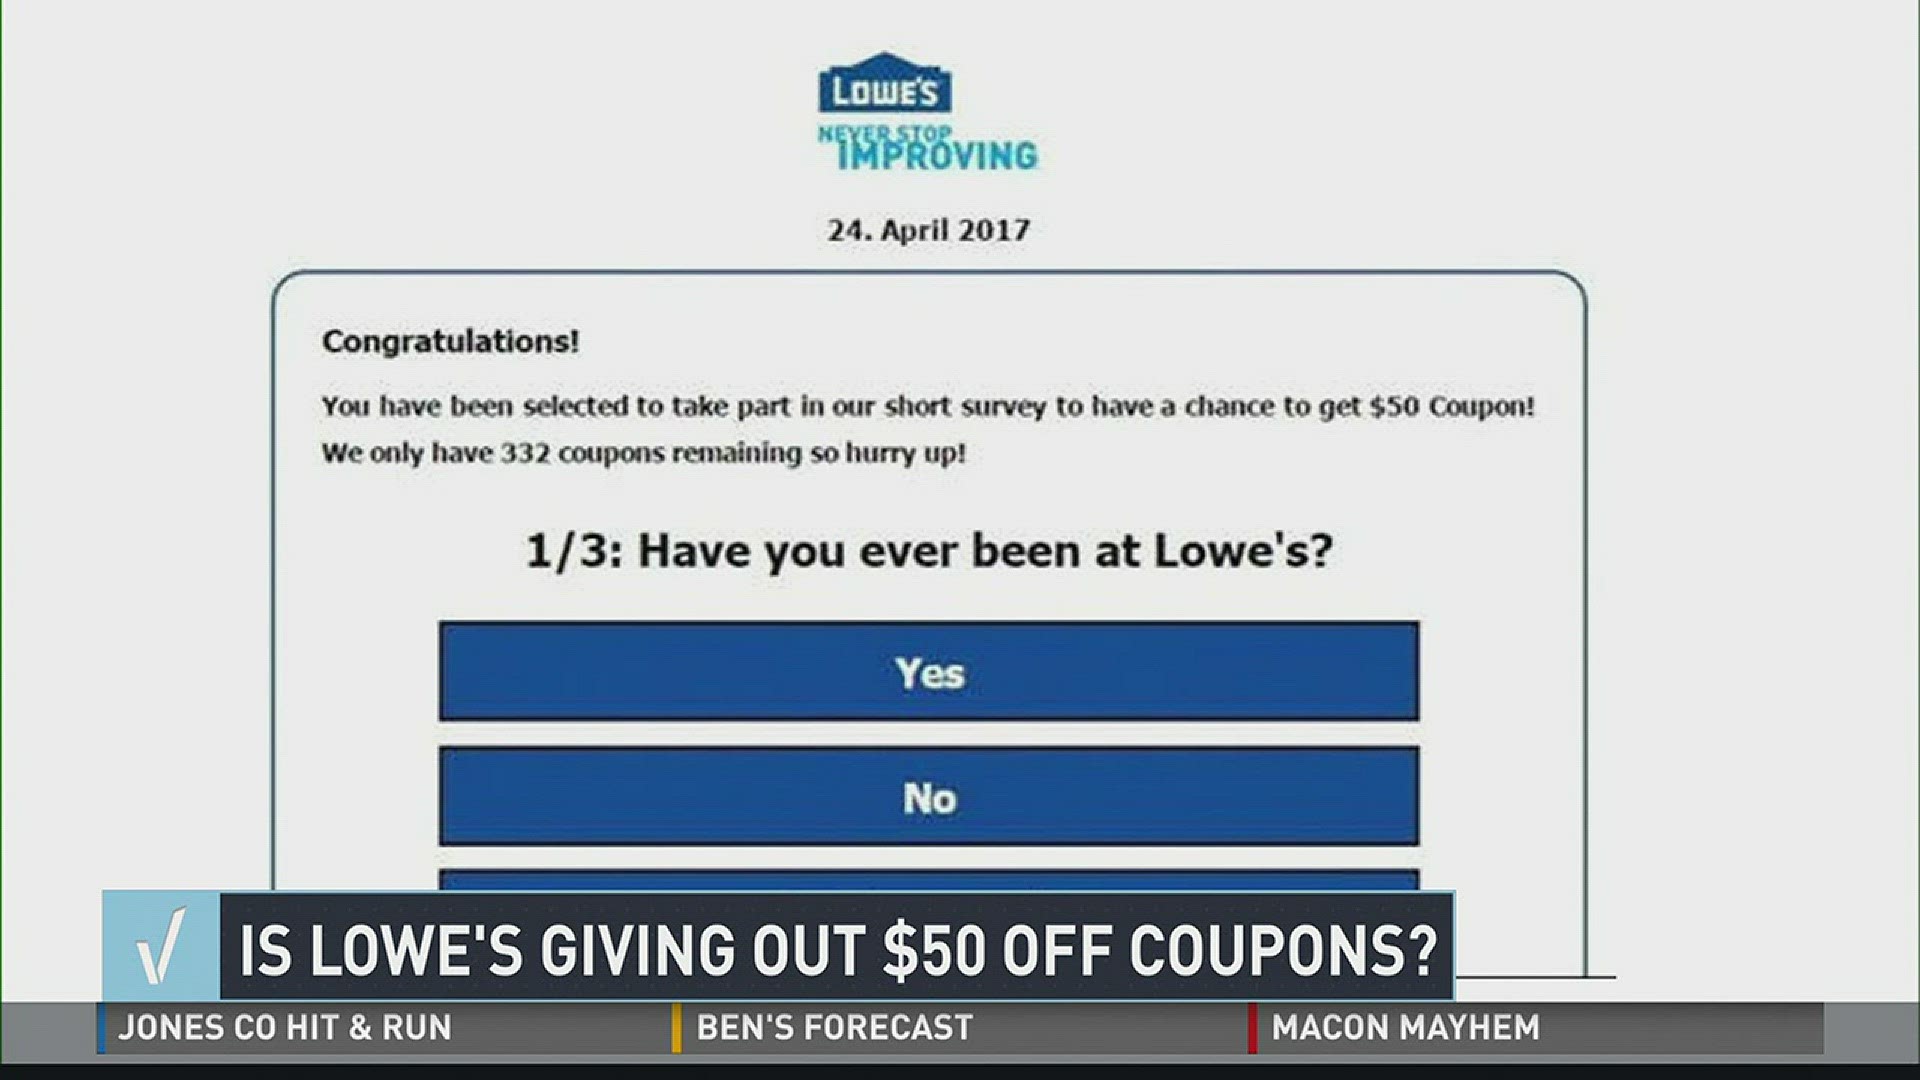 Verify: Is Lowe's giving out $50 off coupons?